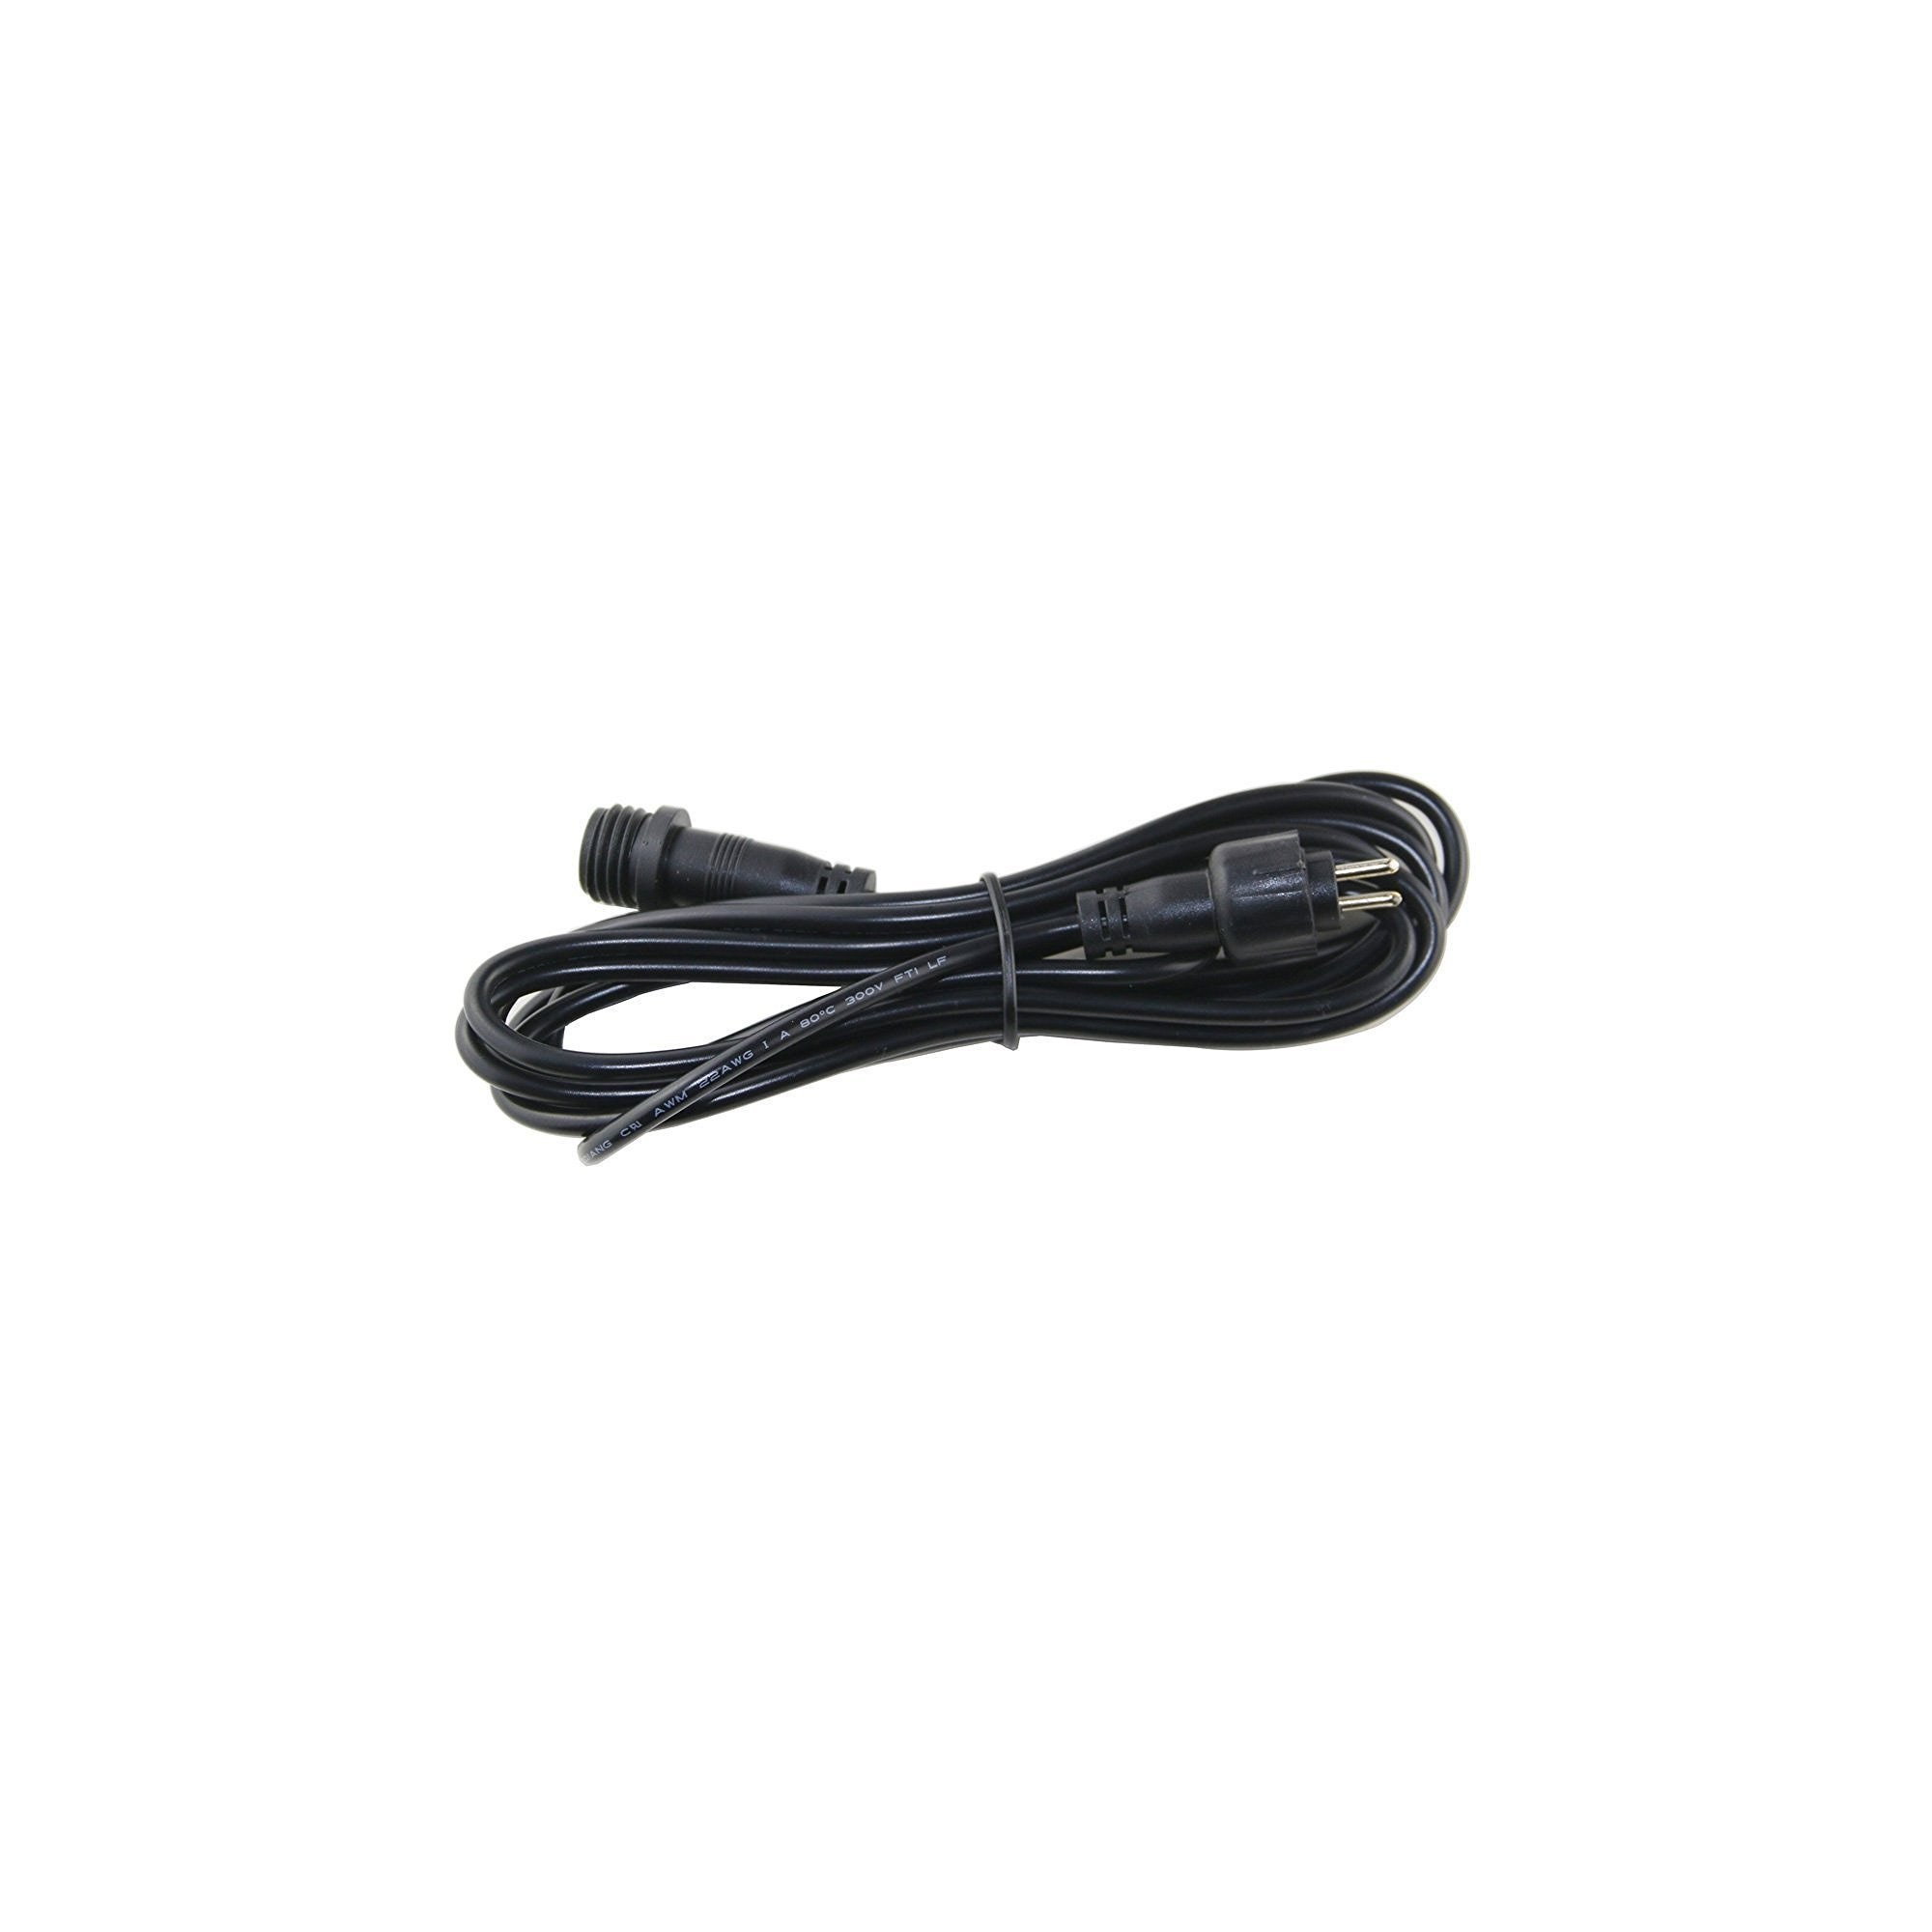 Gartus 1m extension cable 12V for outdoor use